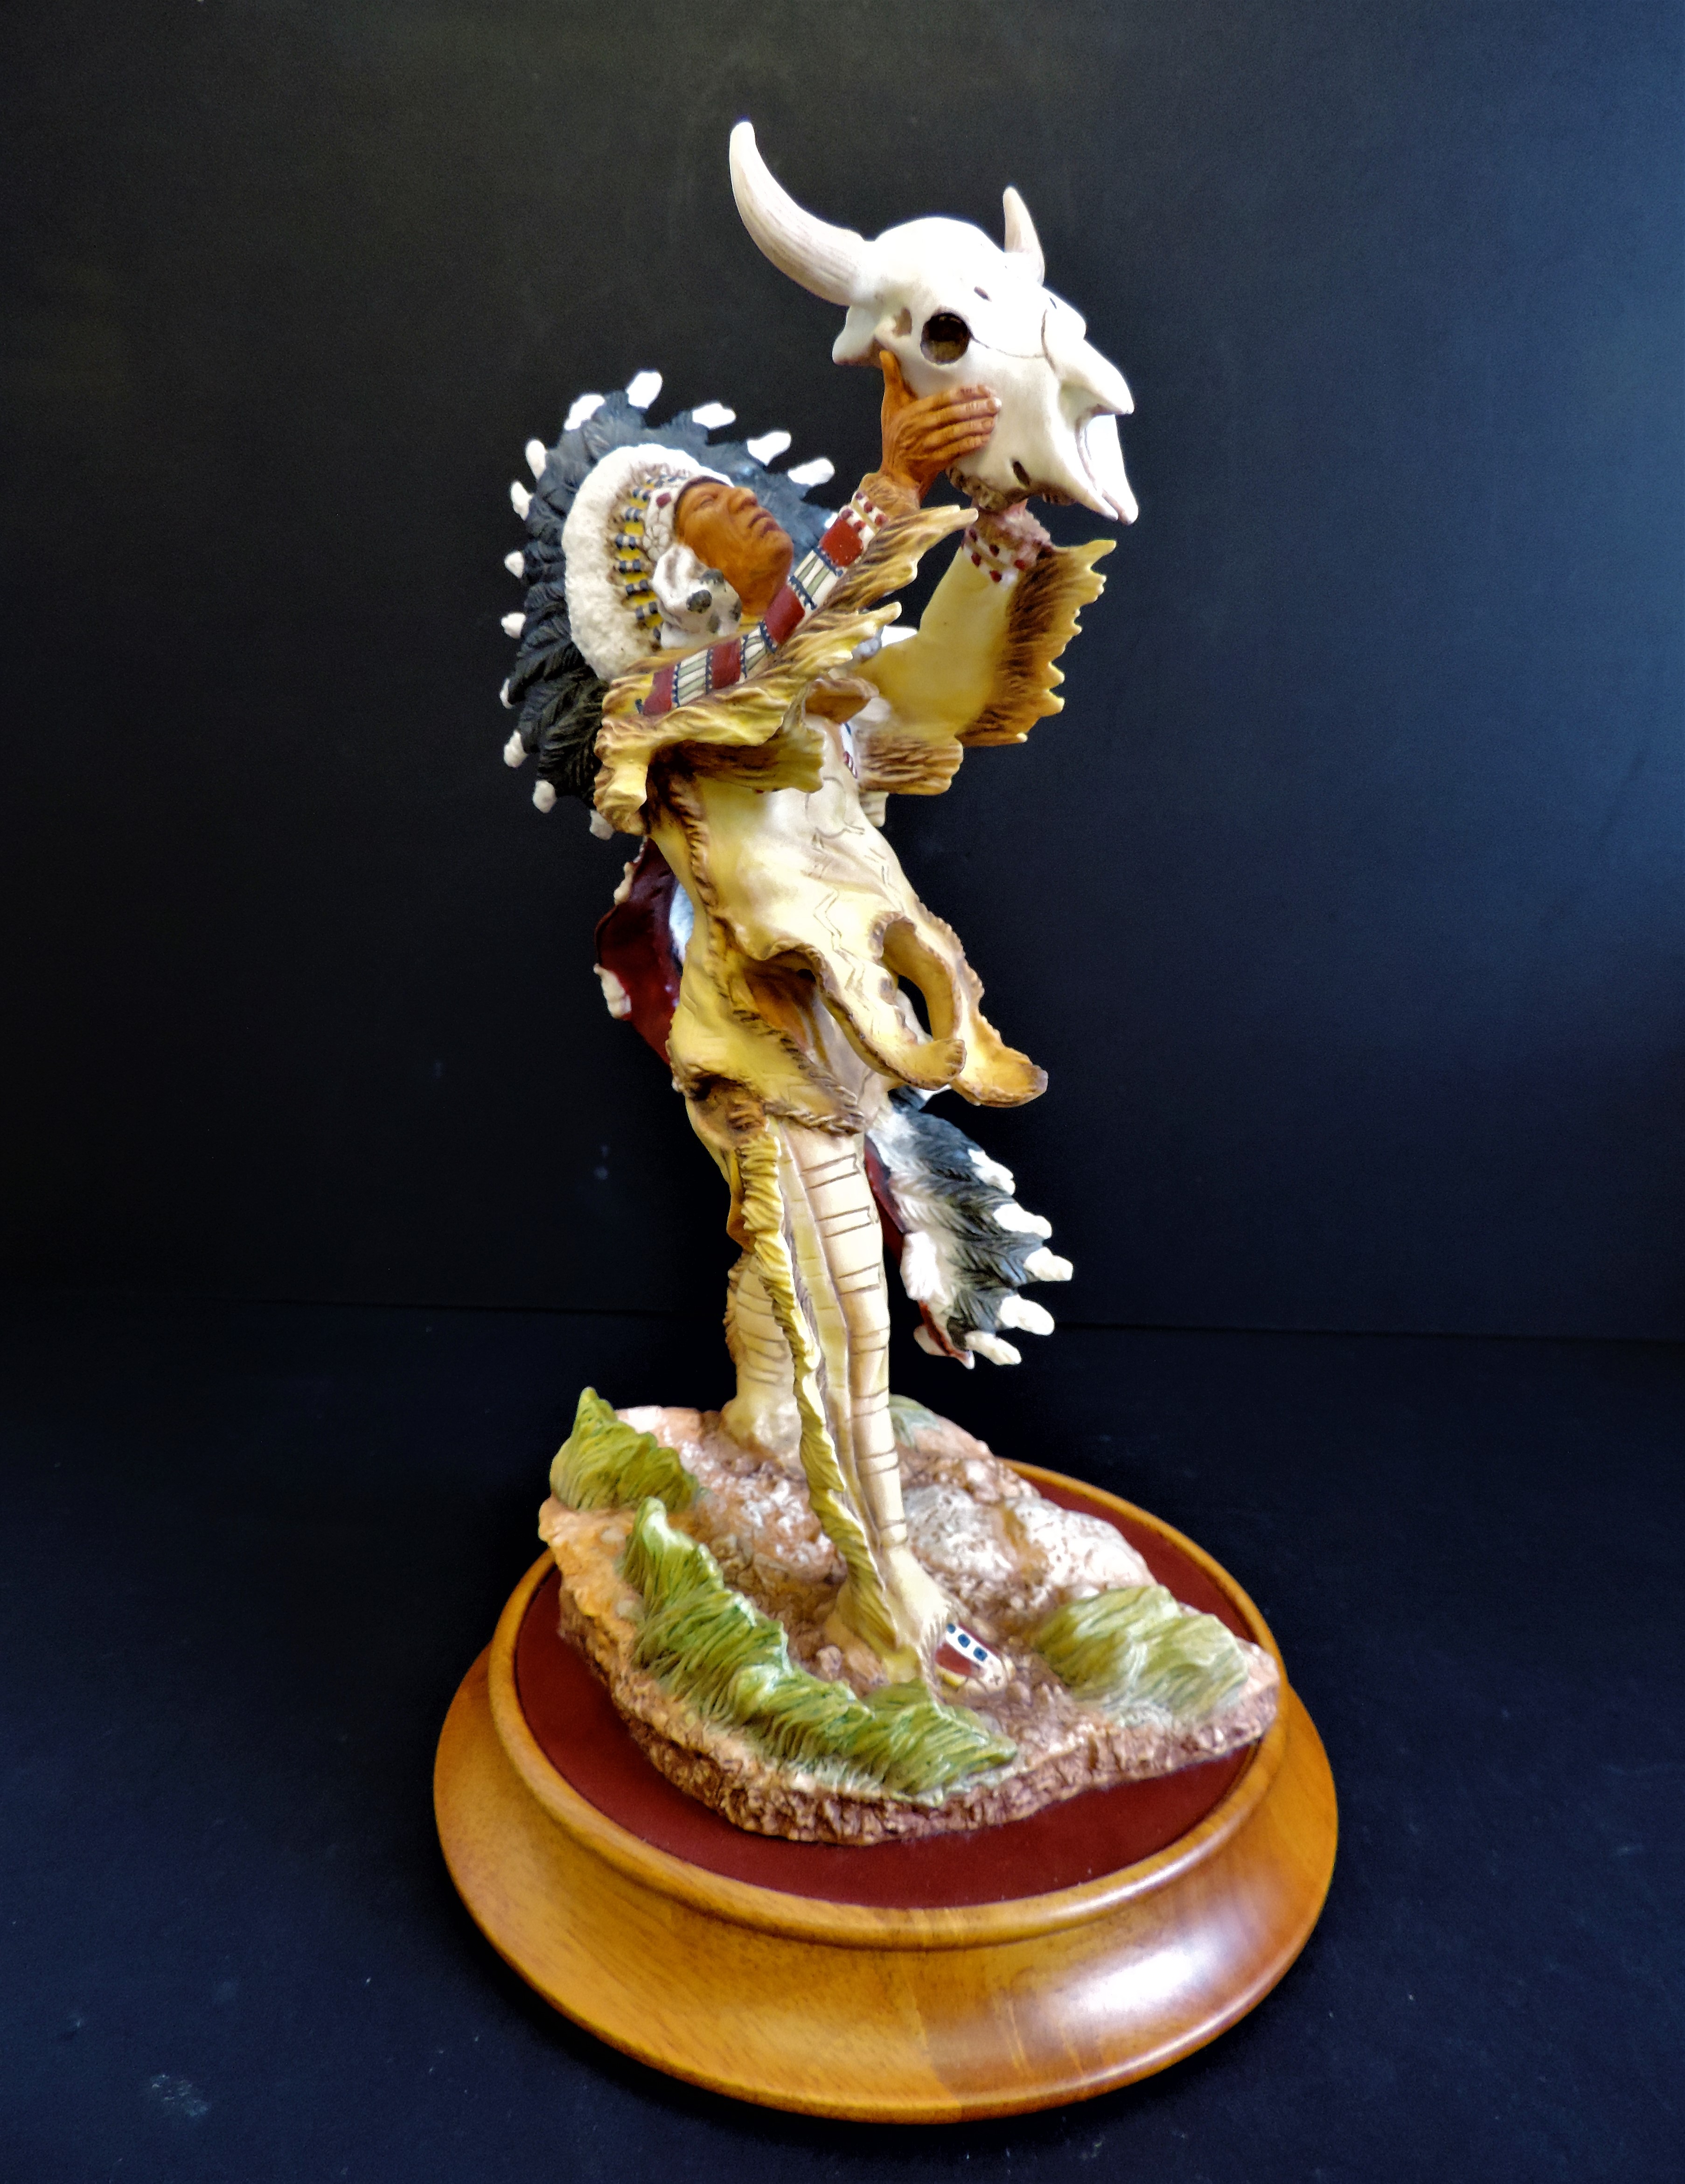 Franklin Mint Prayer to the Great Spirit Porcelain Sculpture - Very Rare - Image 2 of 8